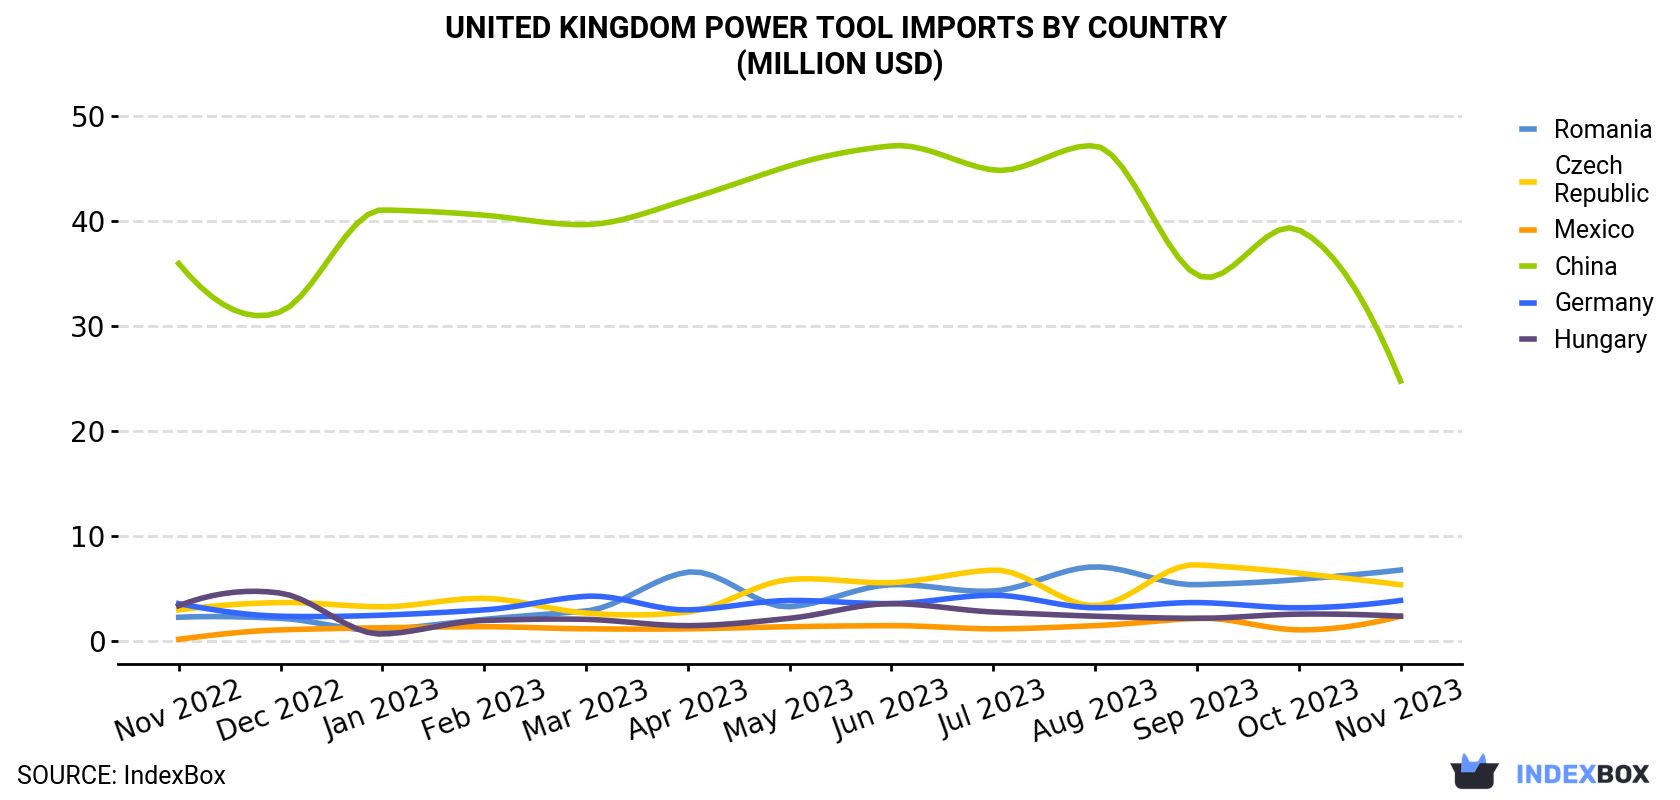 United Kingdom Power Tool Imports By Country (Million USD)